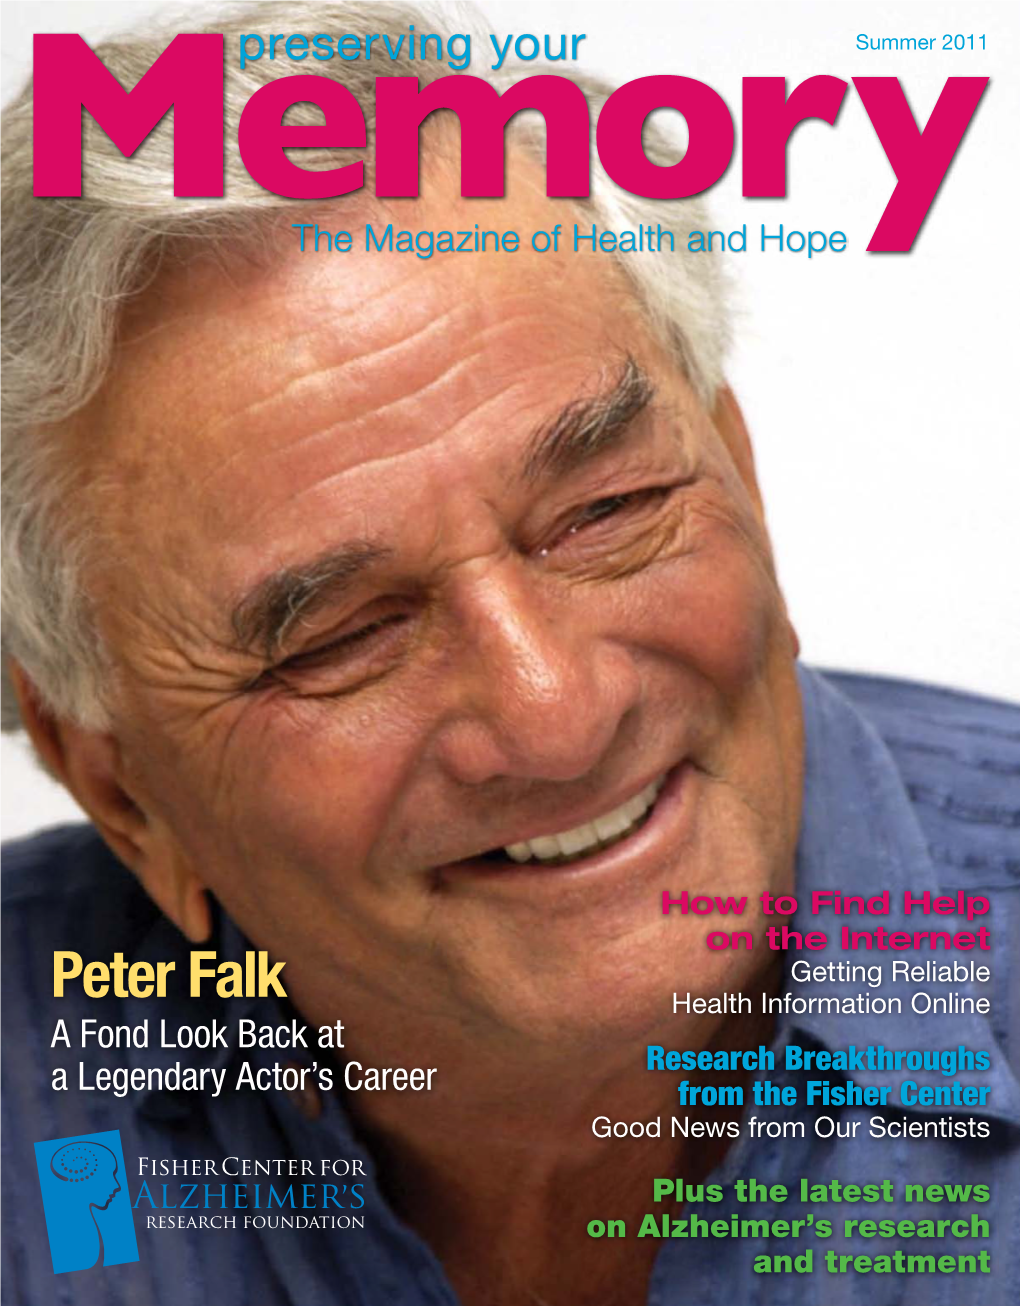 Peter Falk Health Information Online a Fond Look Back at Research Breakthroughs a Legendary Actor’S Career from the Fisher Center Good News from Our Scientists